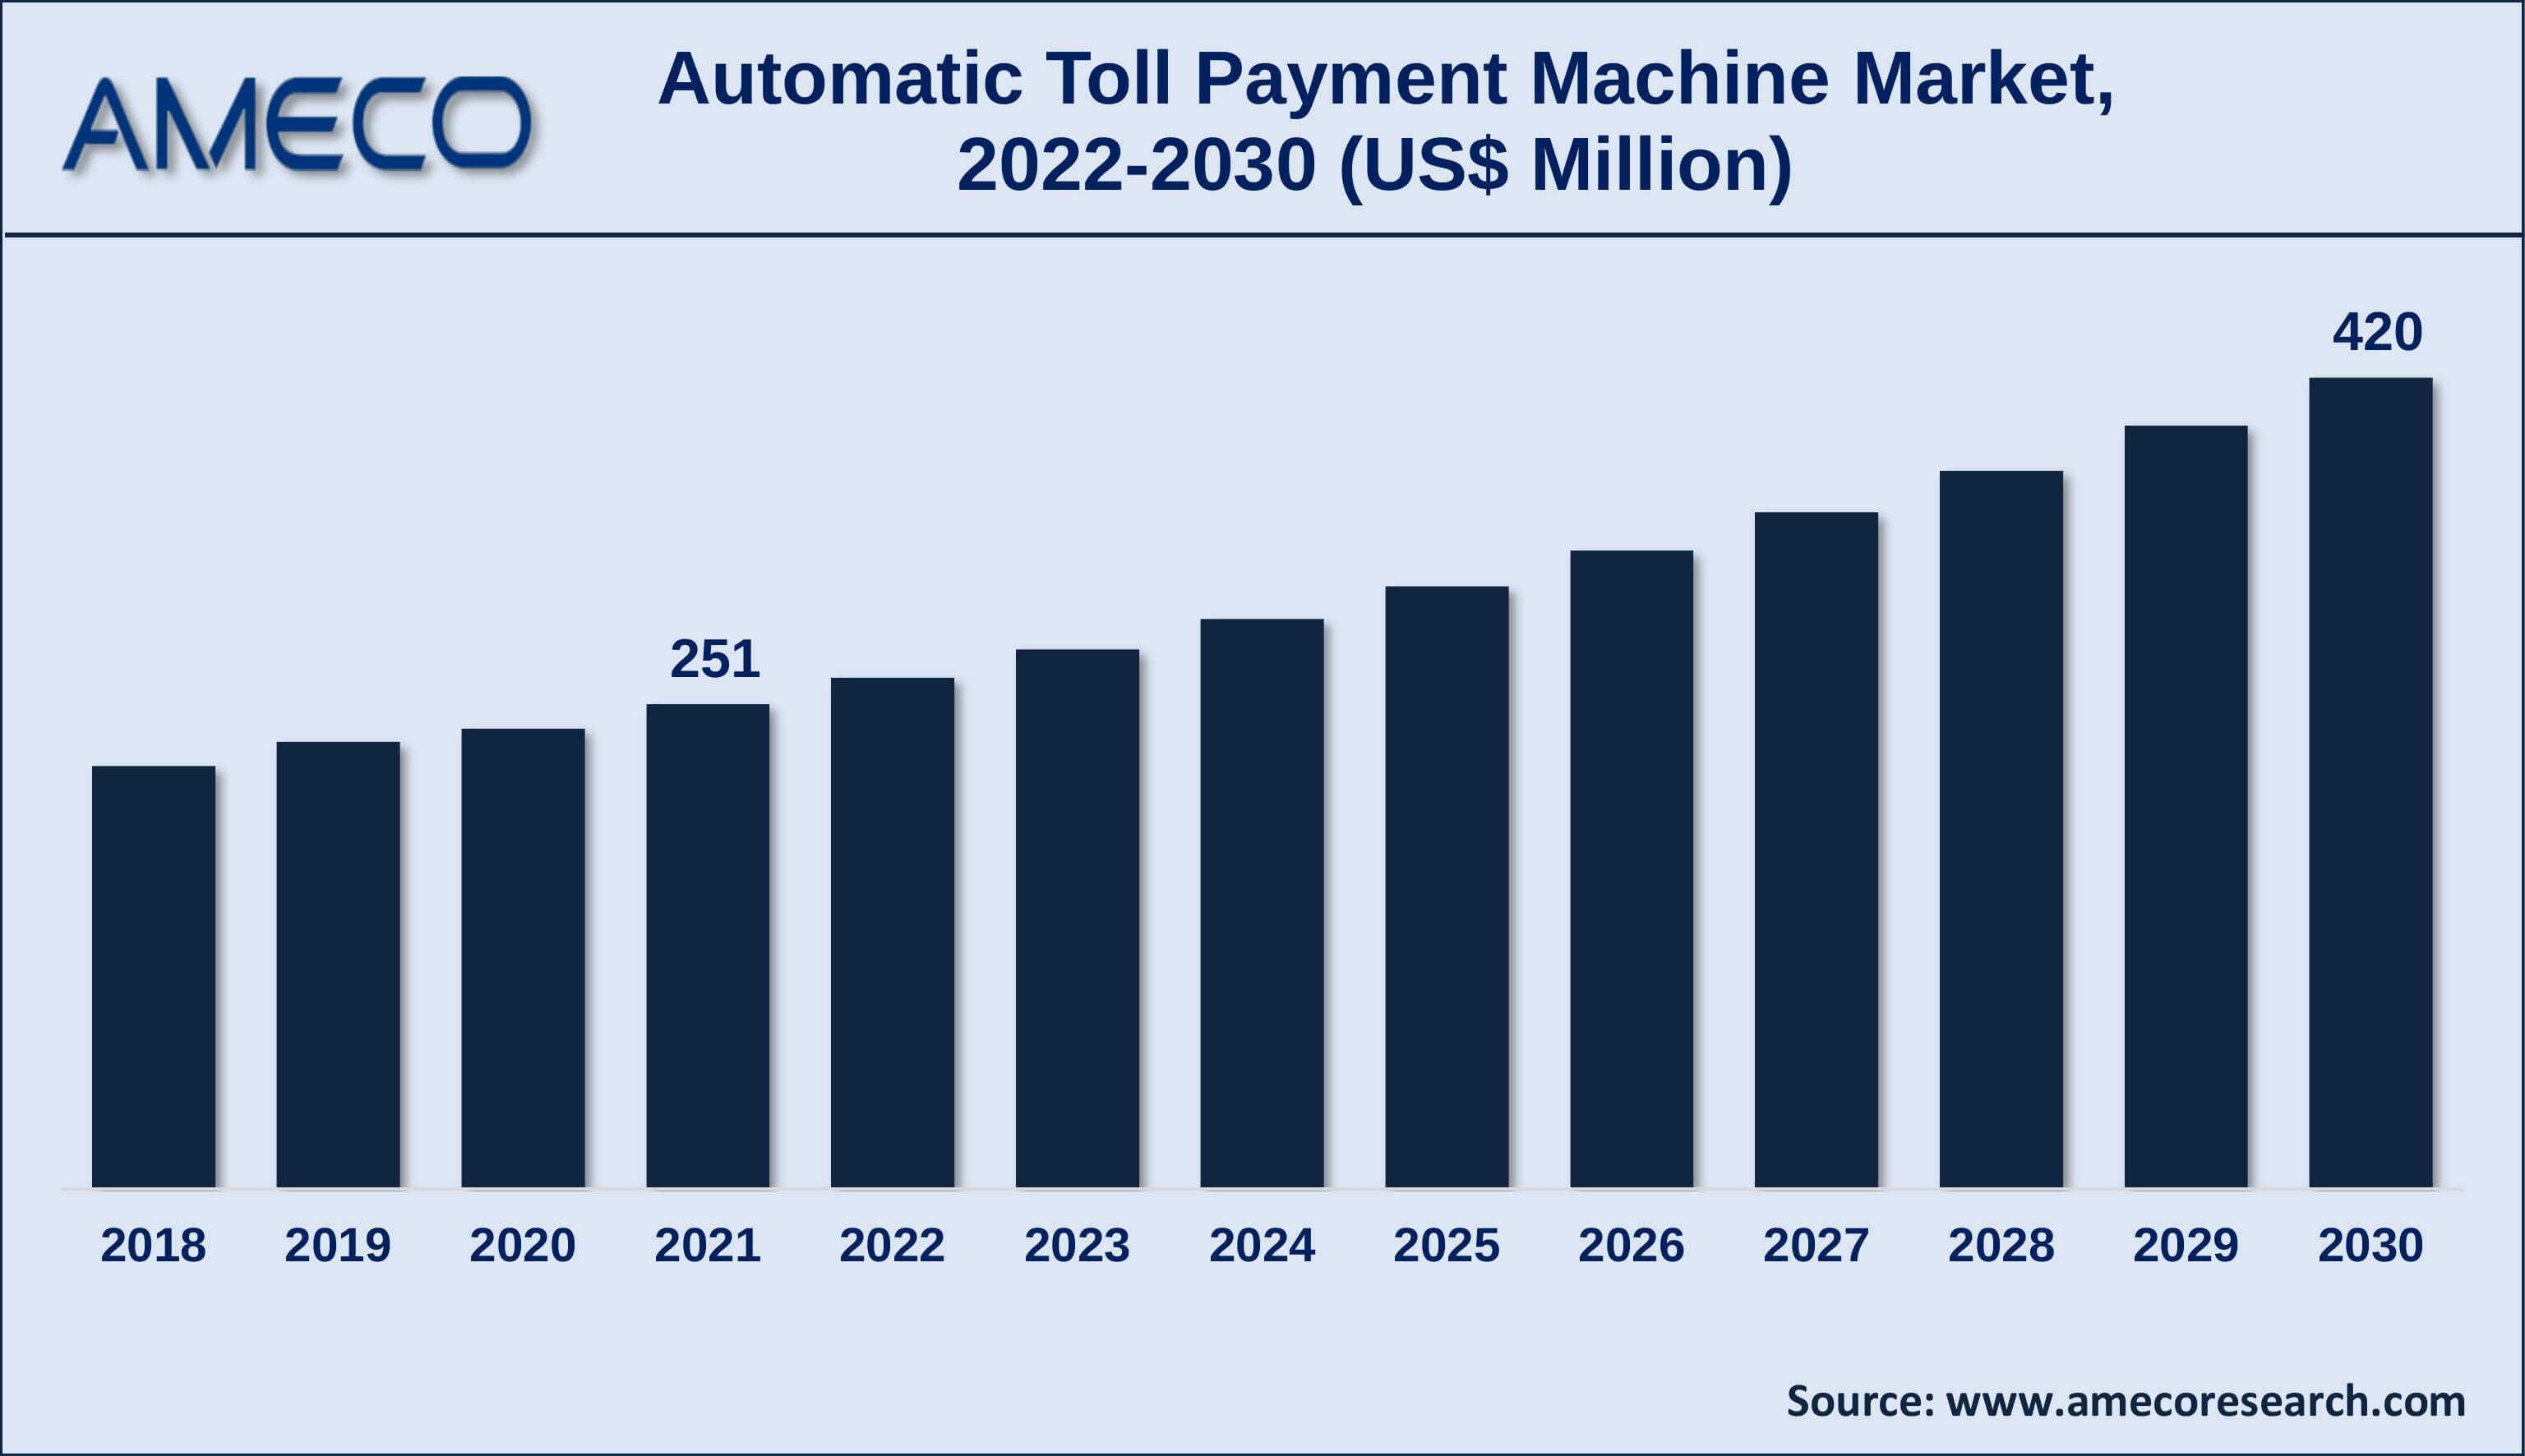 Automatic Toll Payment Machine Market Value